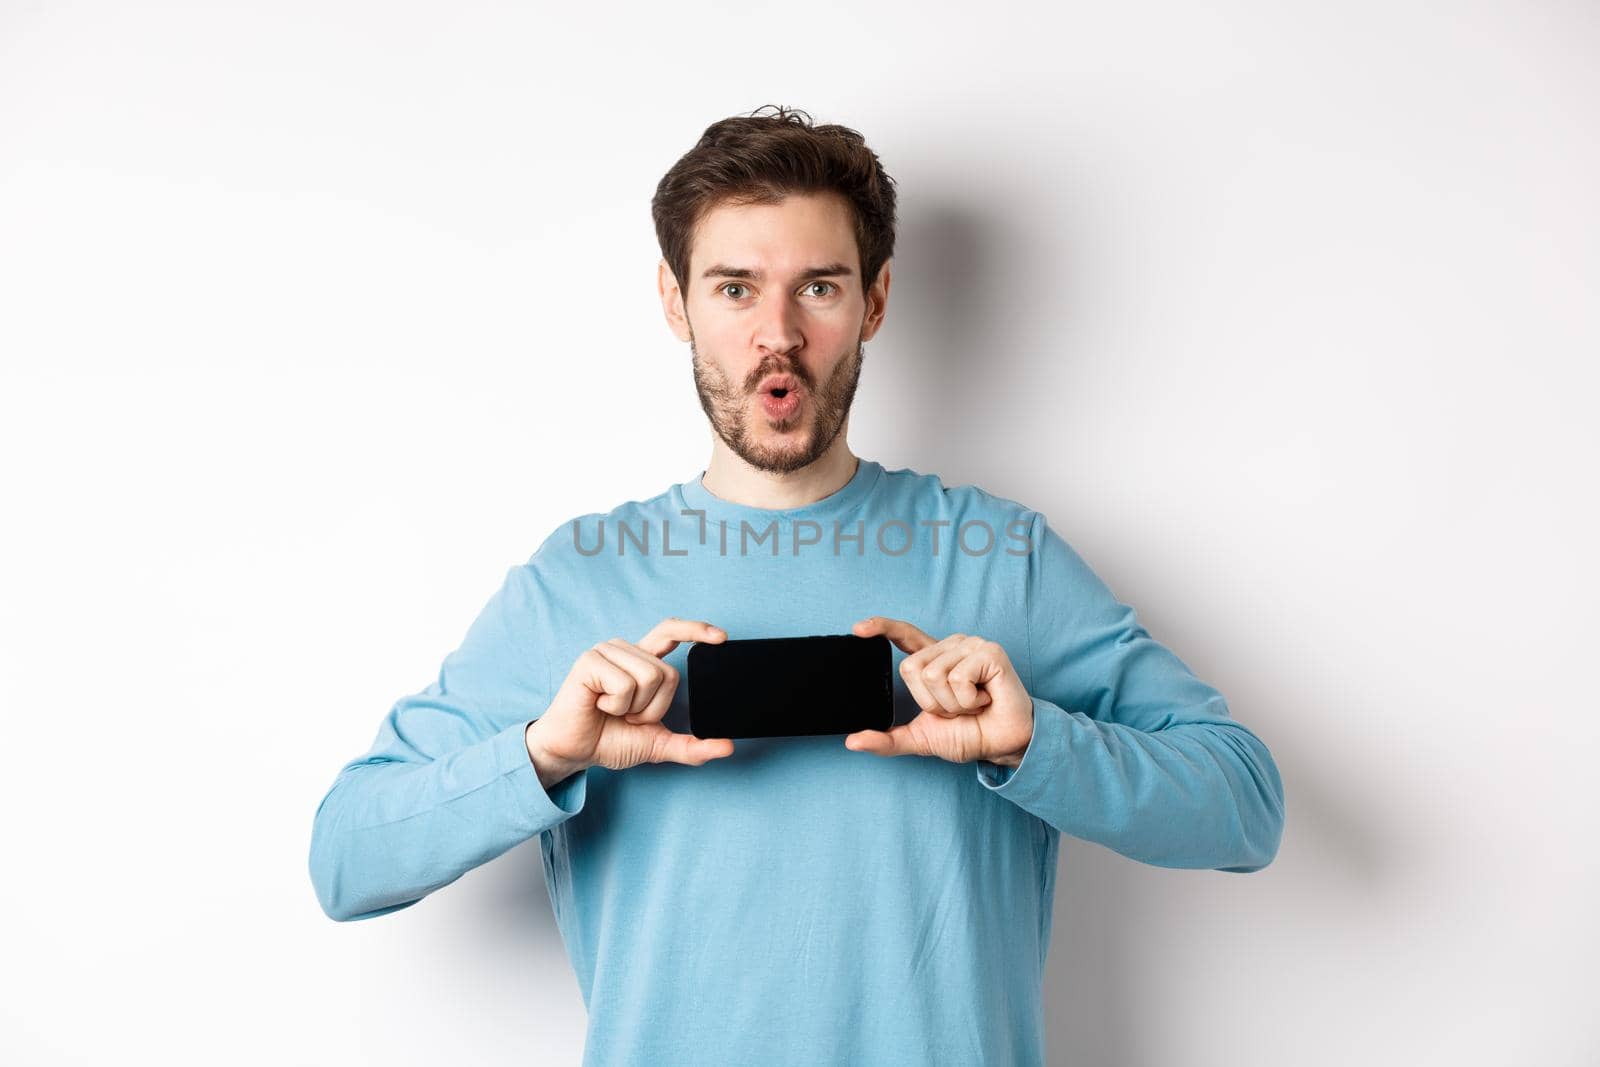 E-commerce and shopping concept. Image of impressed man saying wow and showing blank mobile phone screen in horizontal, standing over white background.